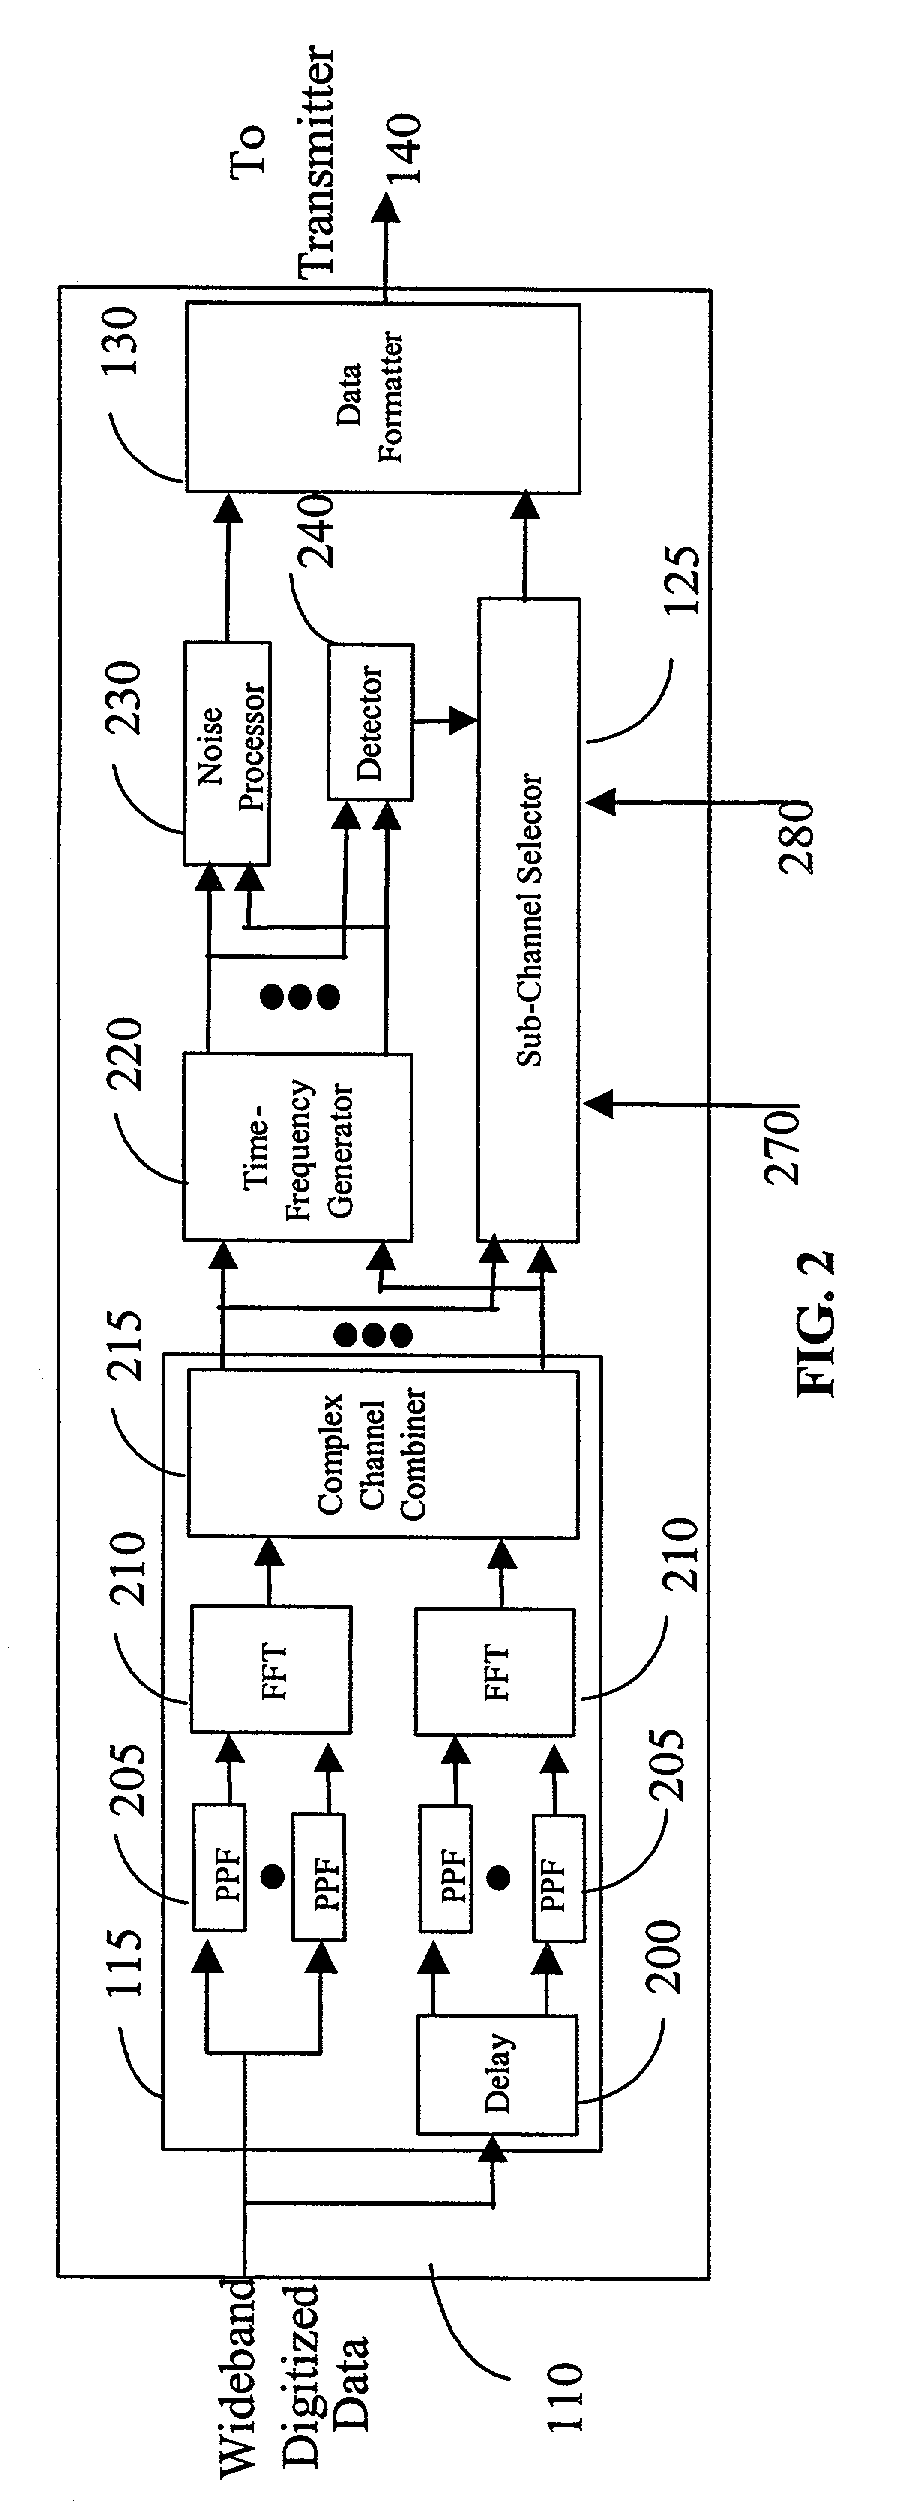 Method and apparatus for adaptive signal compression